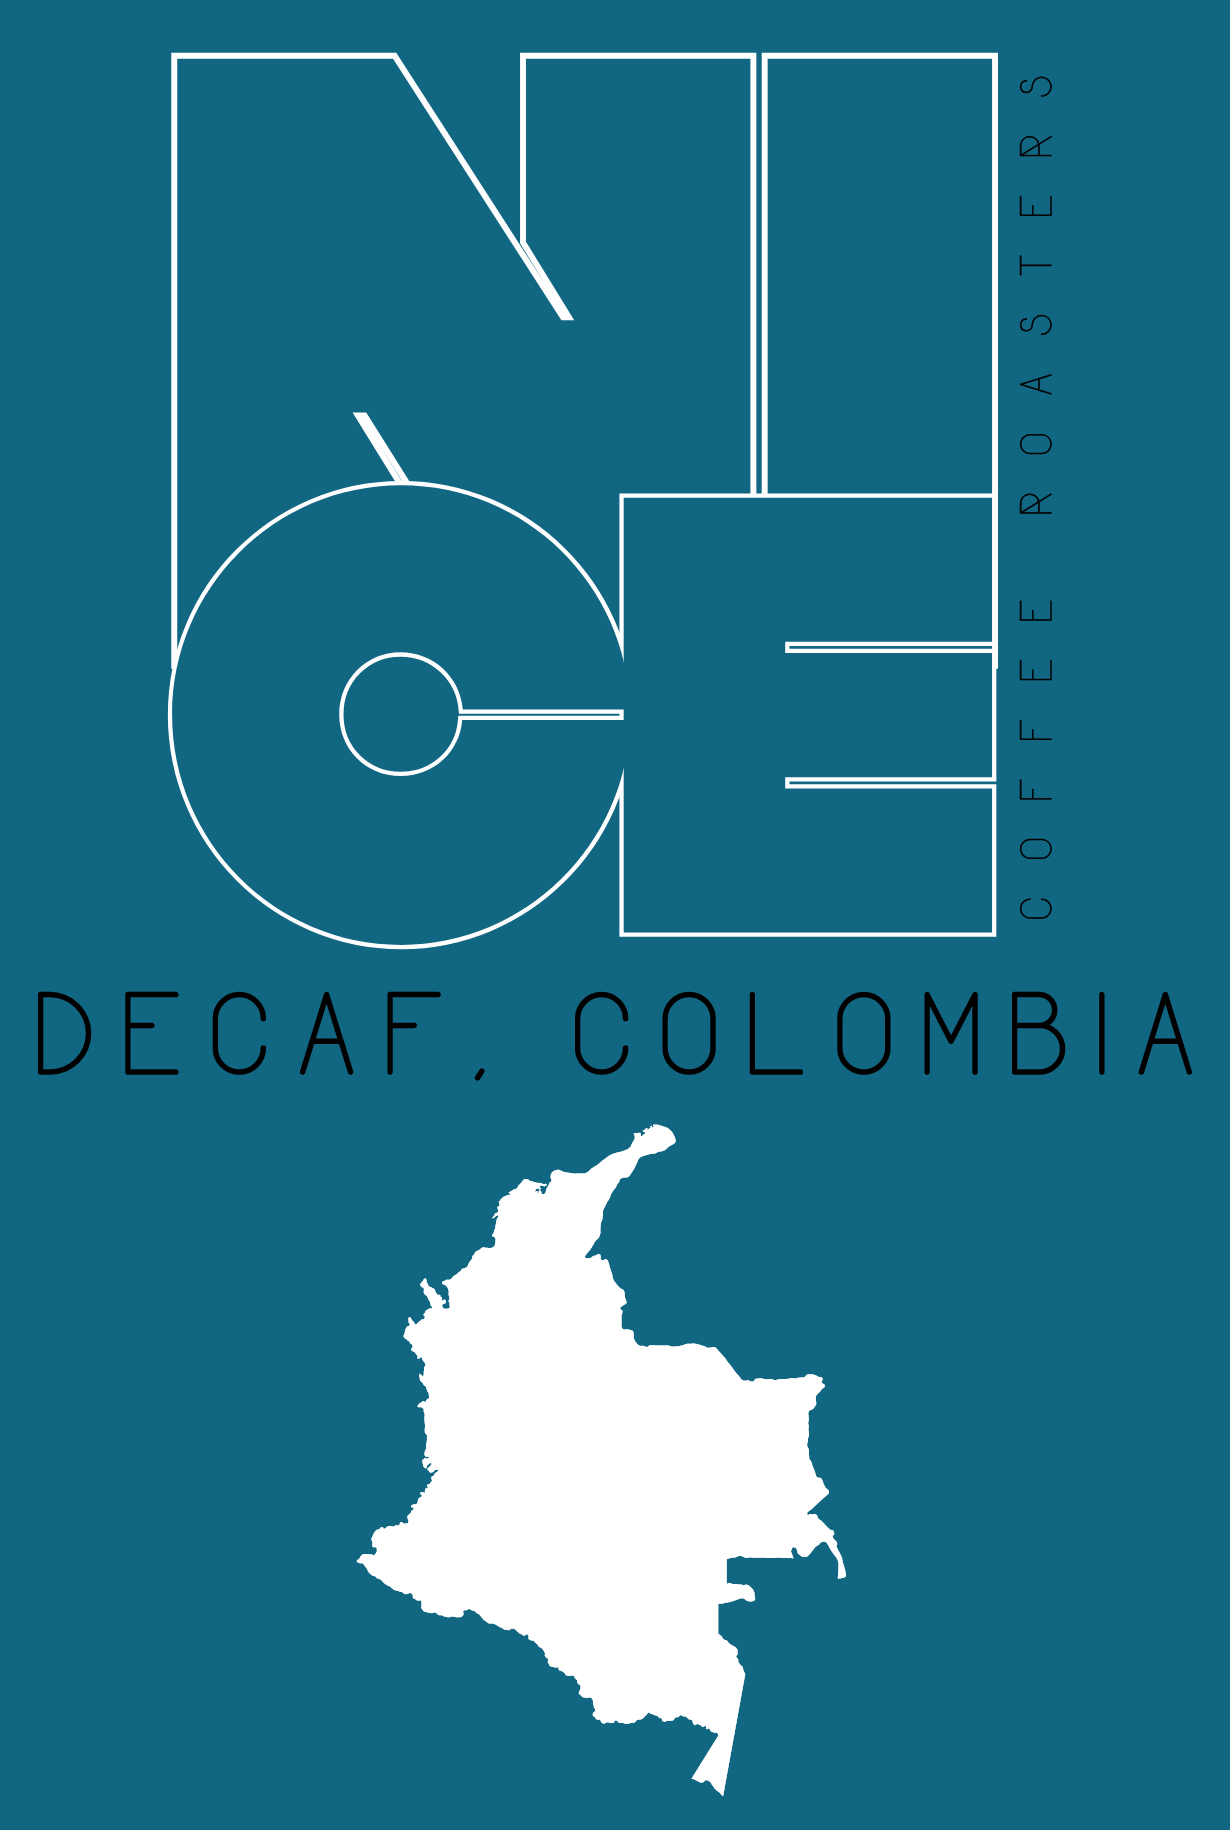 Nice Coffee Roasters logo. Decaf, Colombia. Image of Colombia the country in white. Blue background.